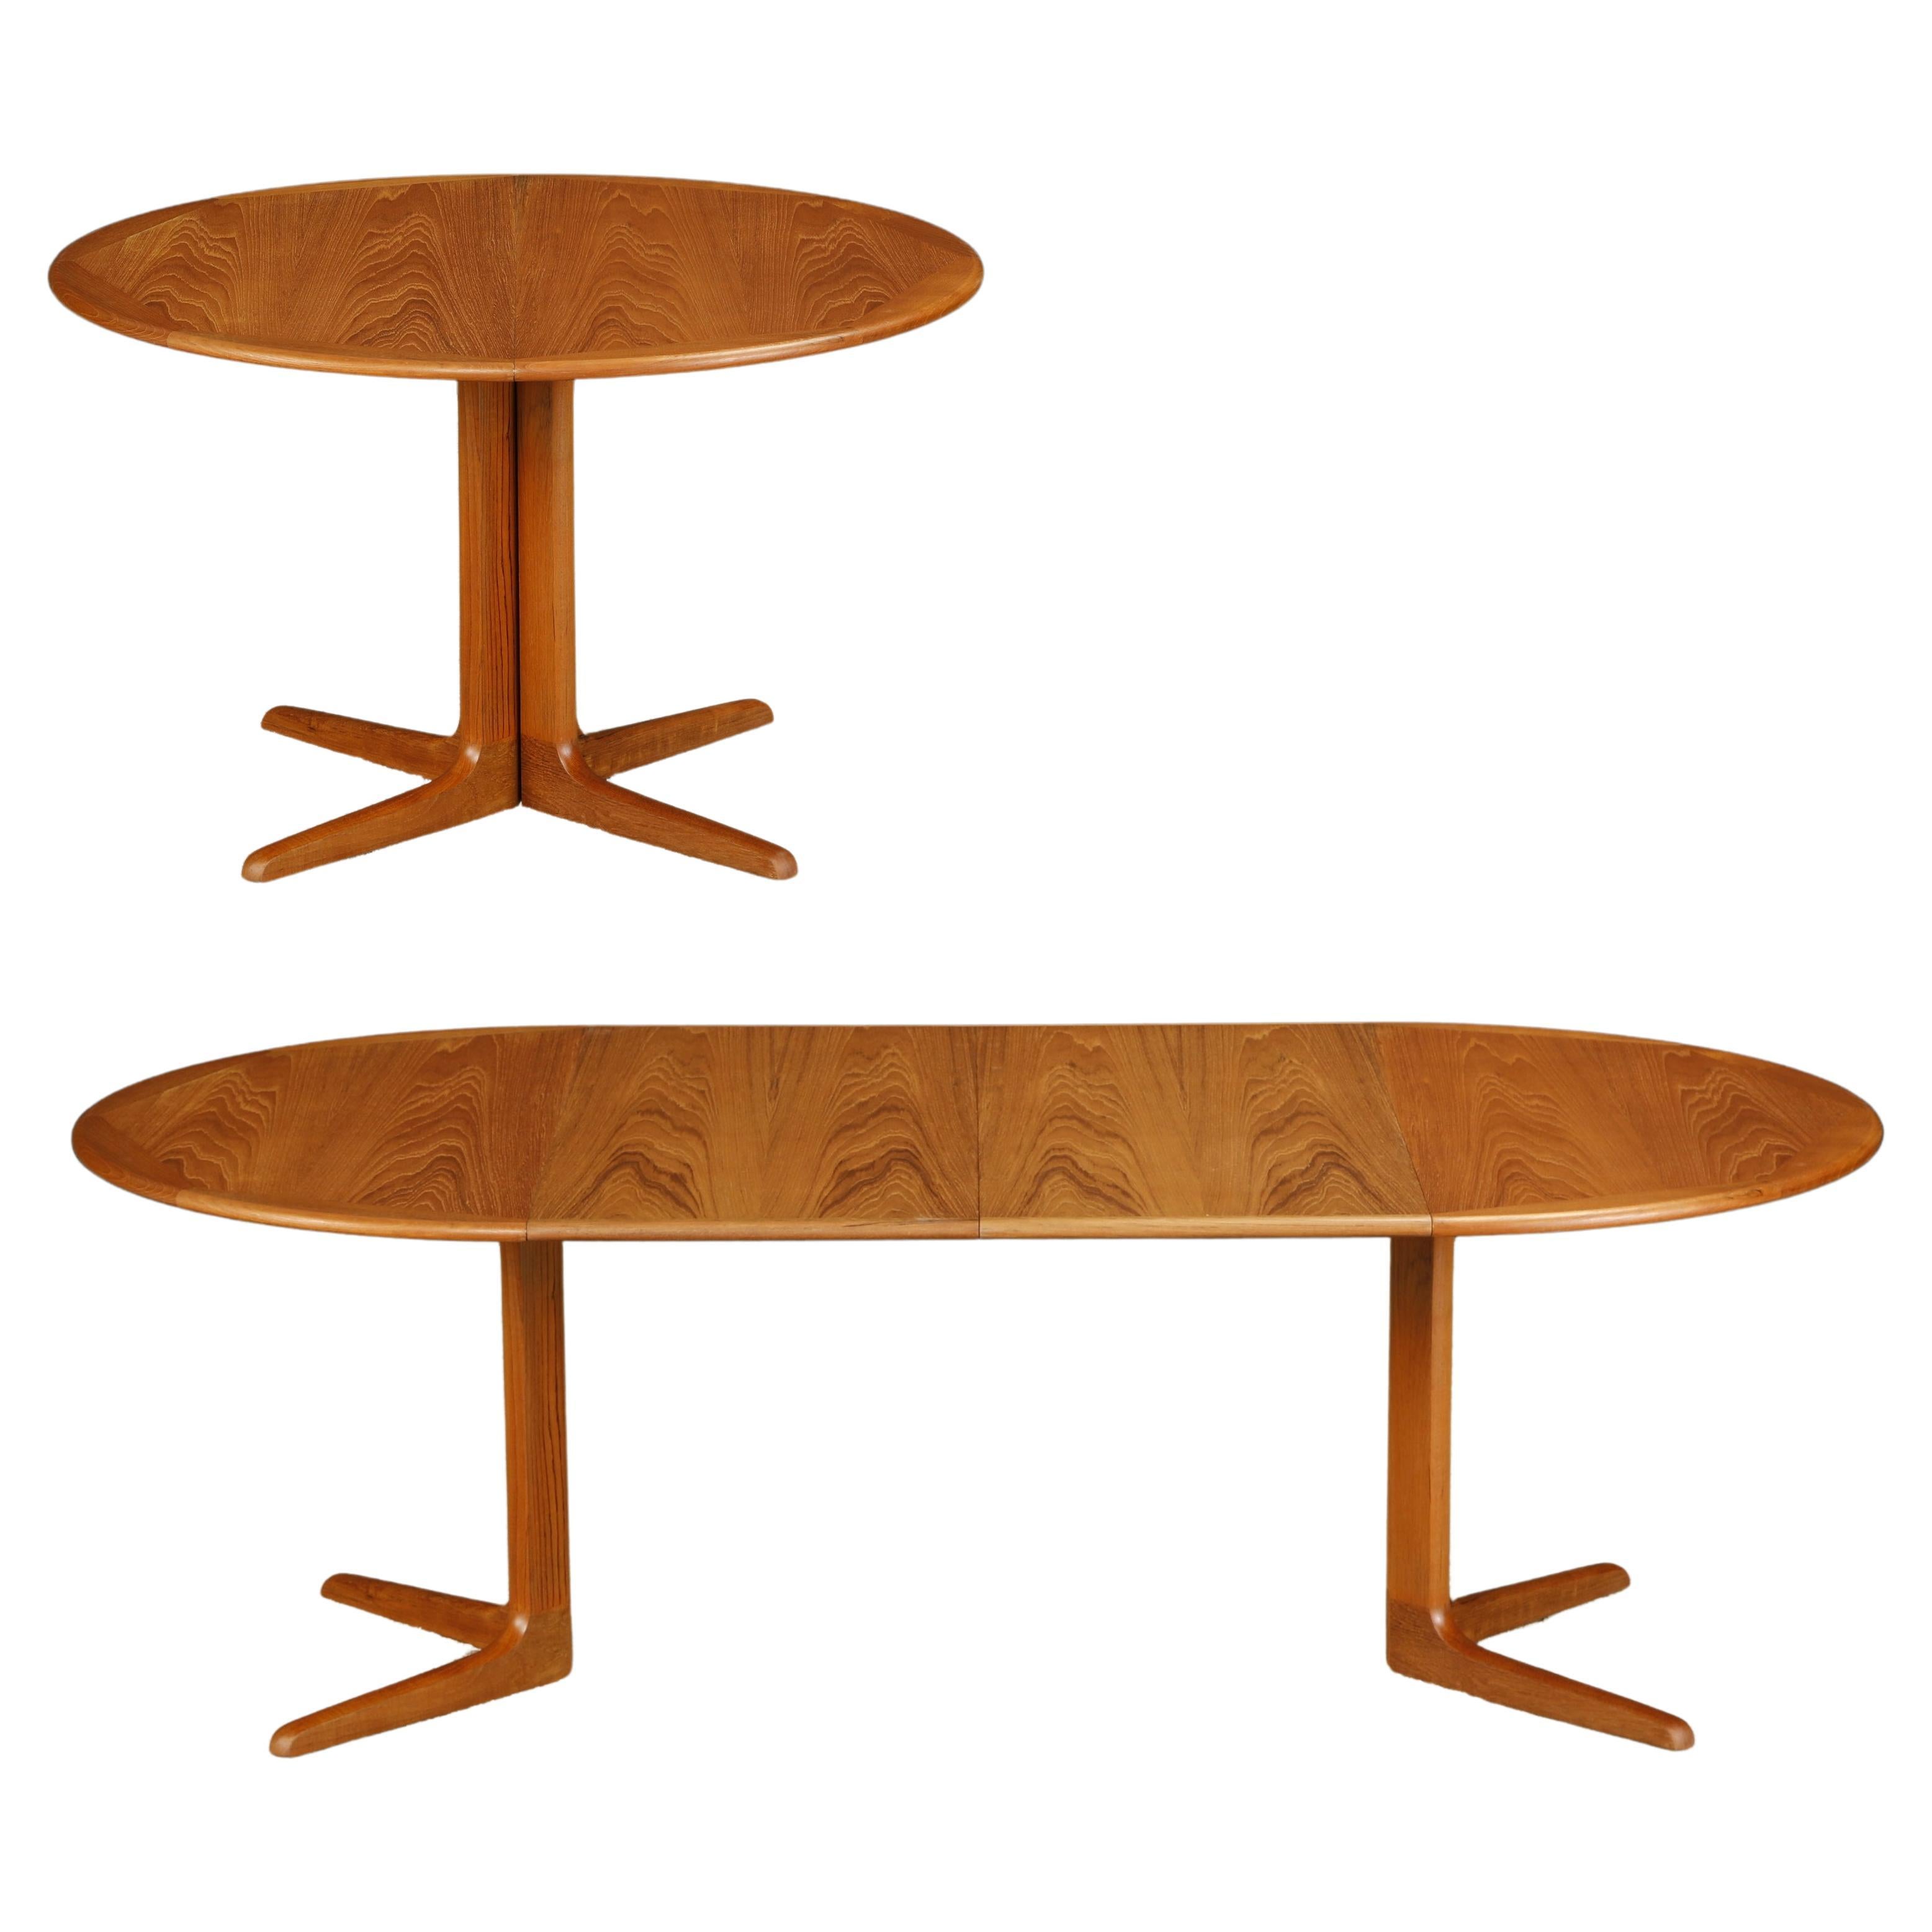 Danish Modern Extendable Dining Table w Two Leaves, c 1970s, Refinished, Signed For Sale